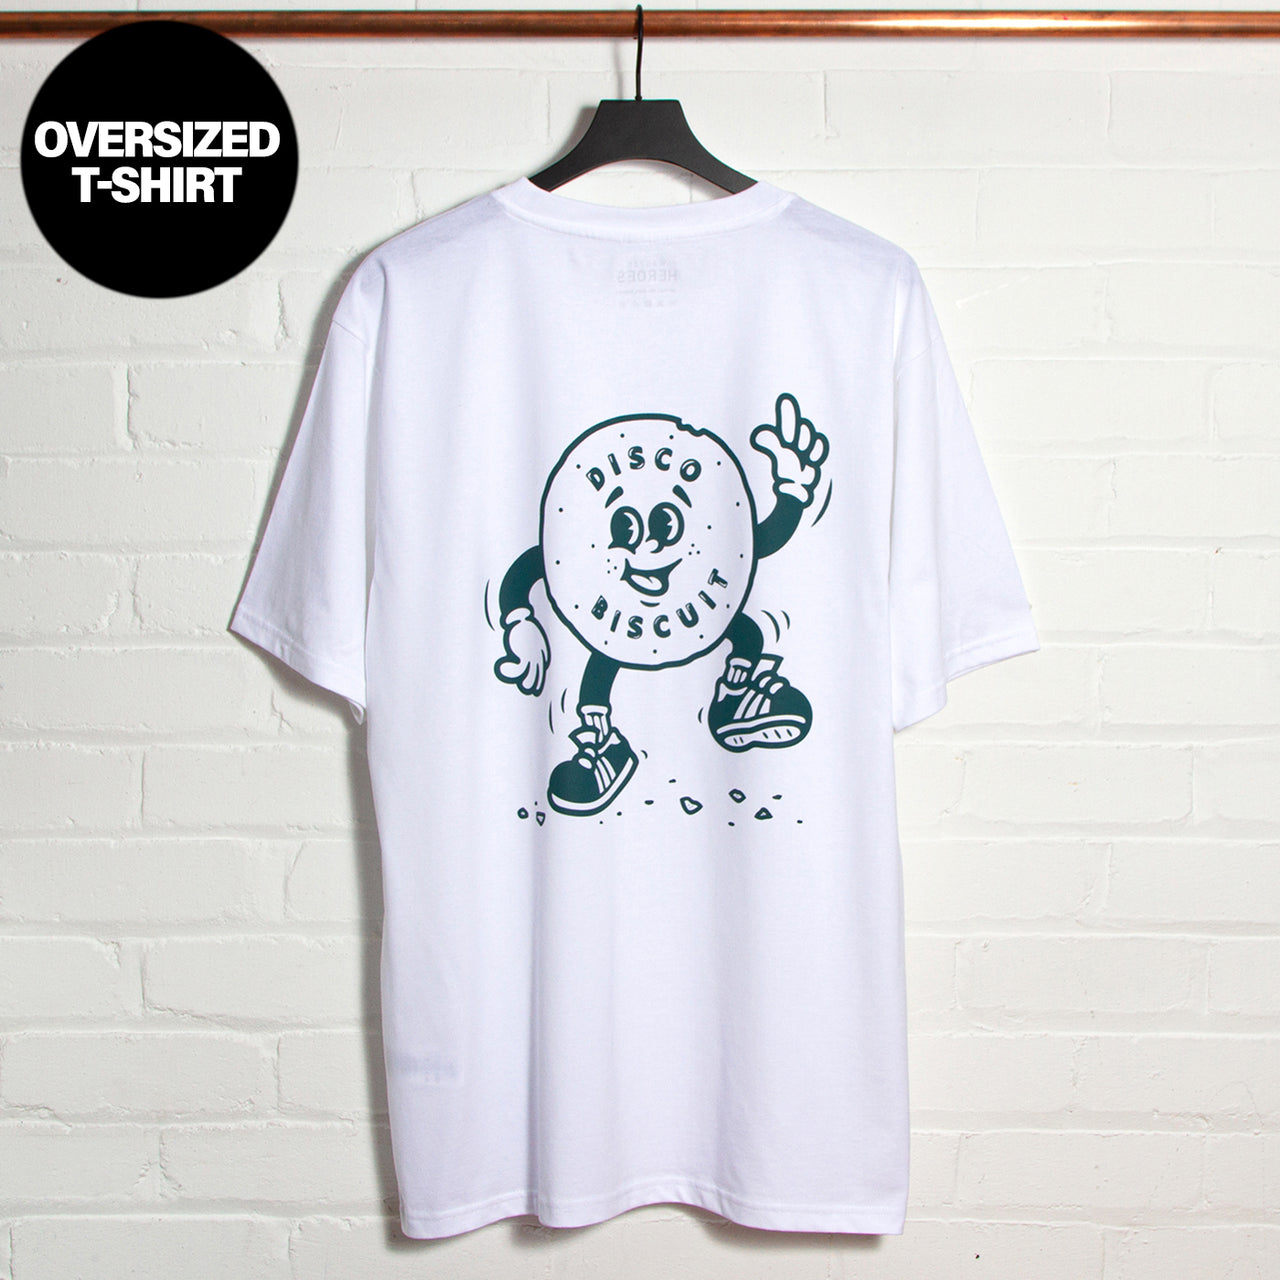 Disco Biscuit - Oversized Tshirt - White